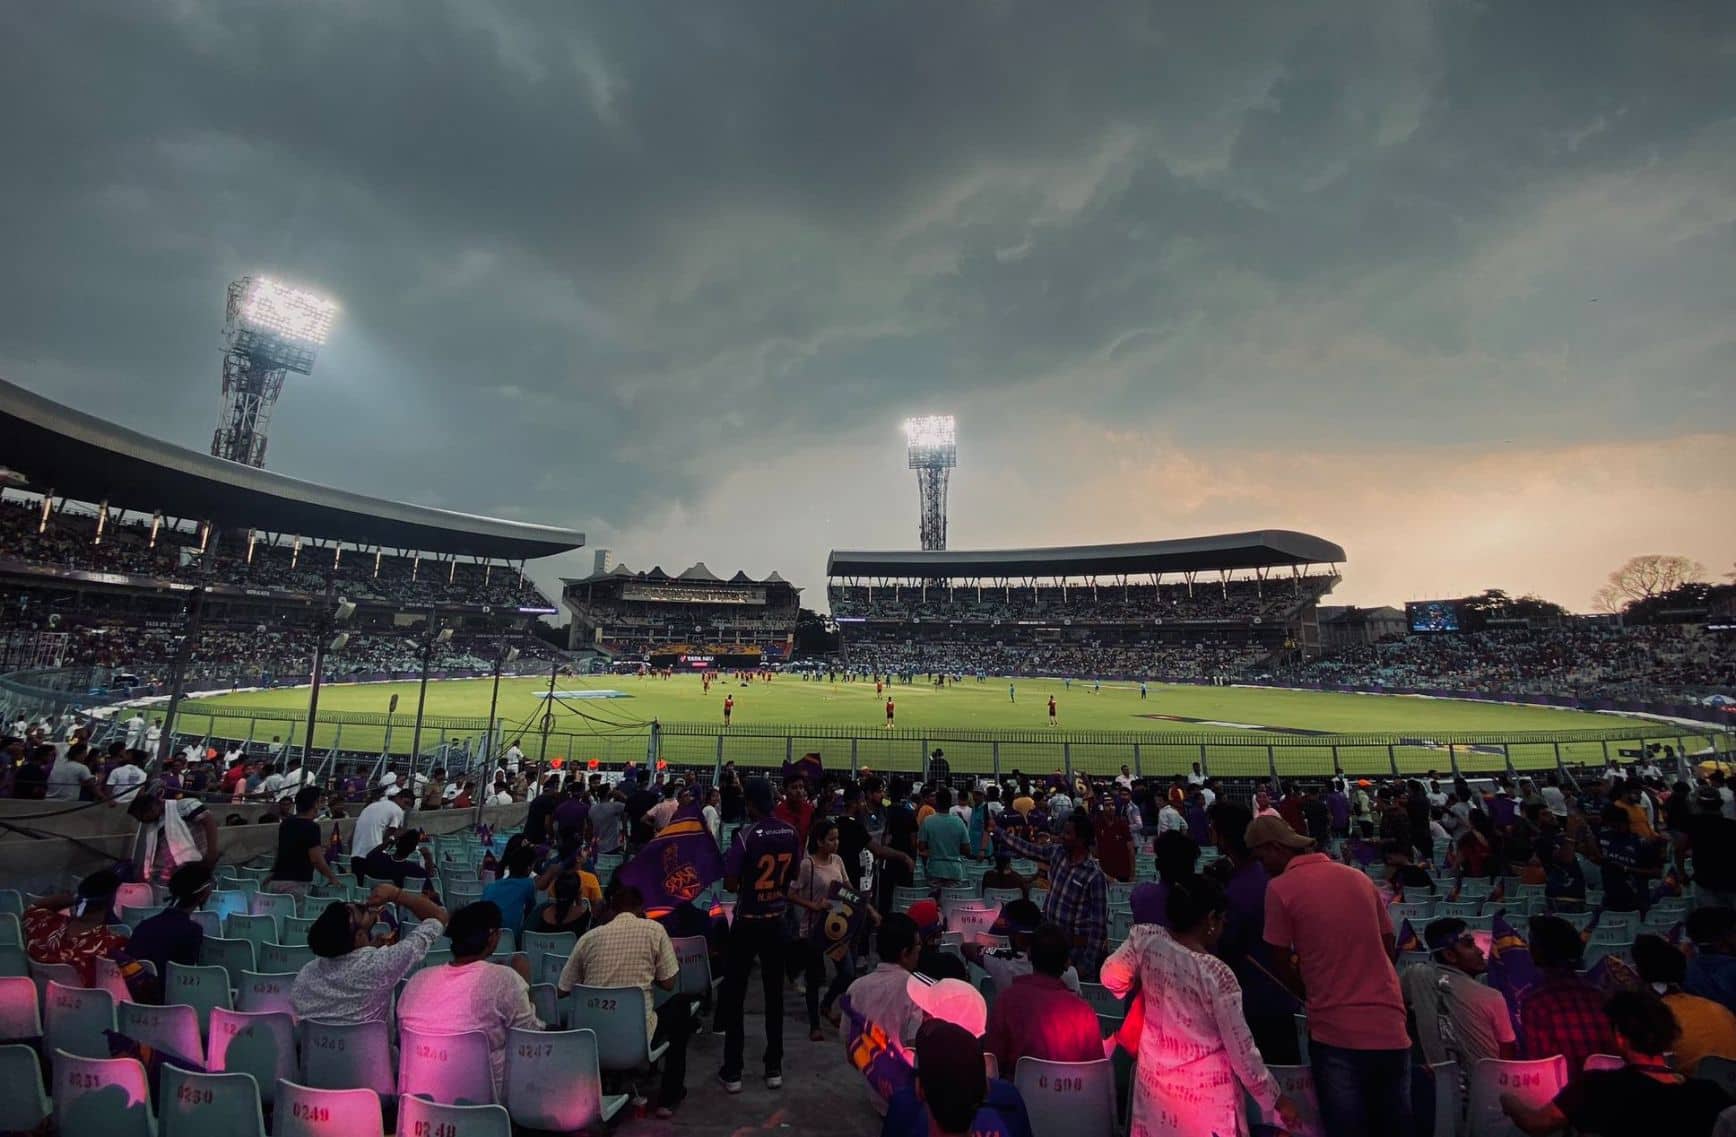 Partly Cloudy Weather in Kolkata; Will Rain Spoil the KKR vs LSG IPL Match?